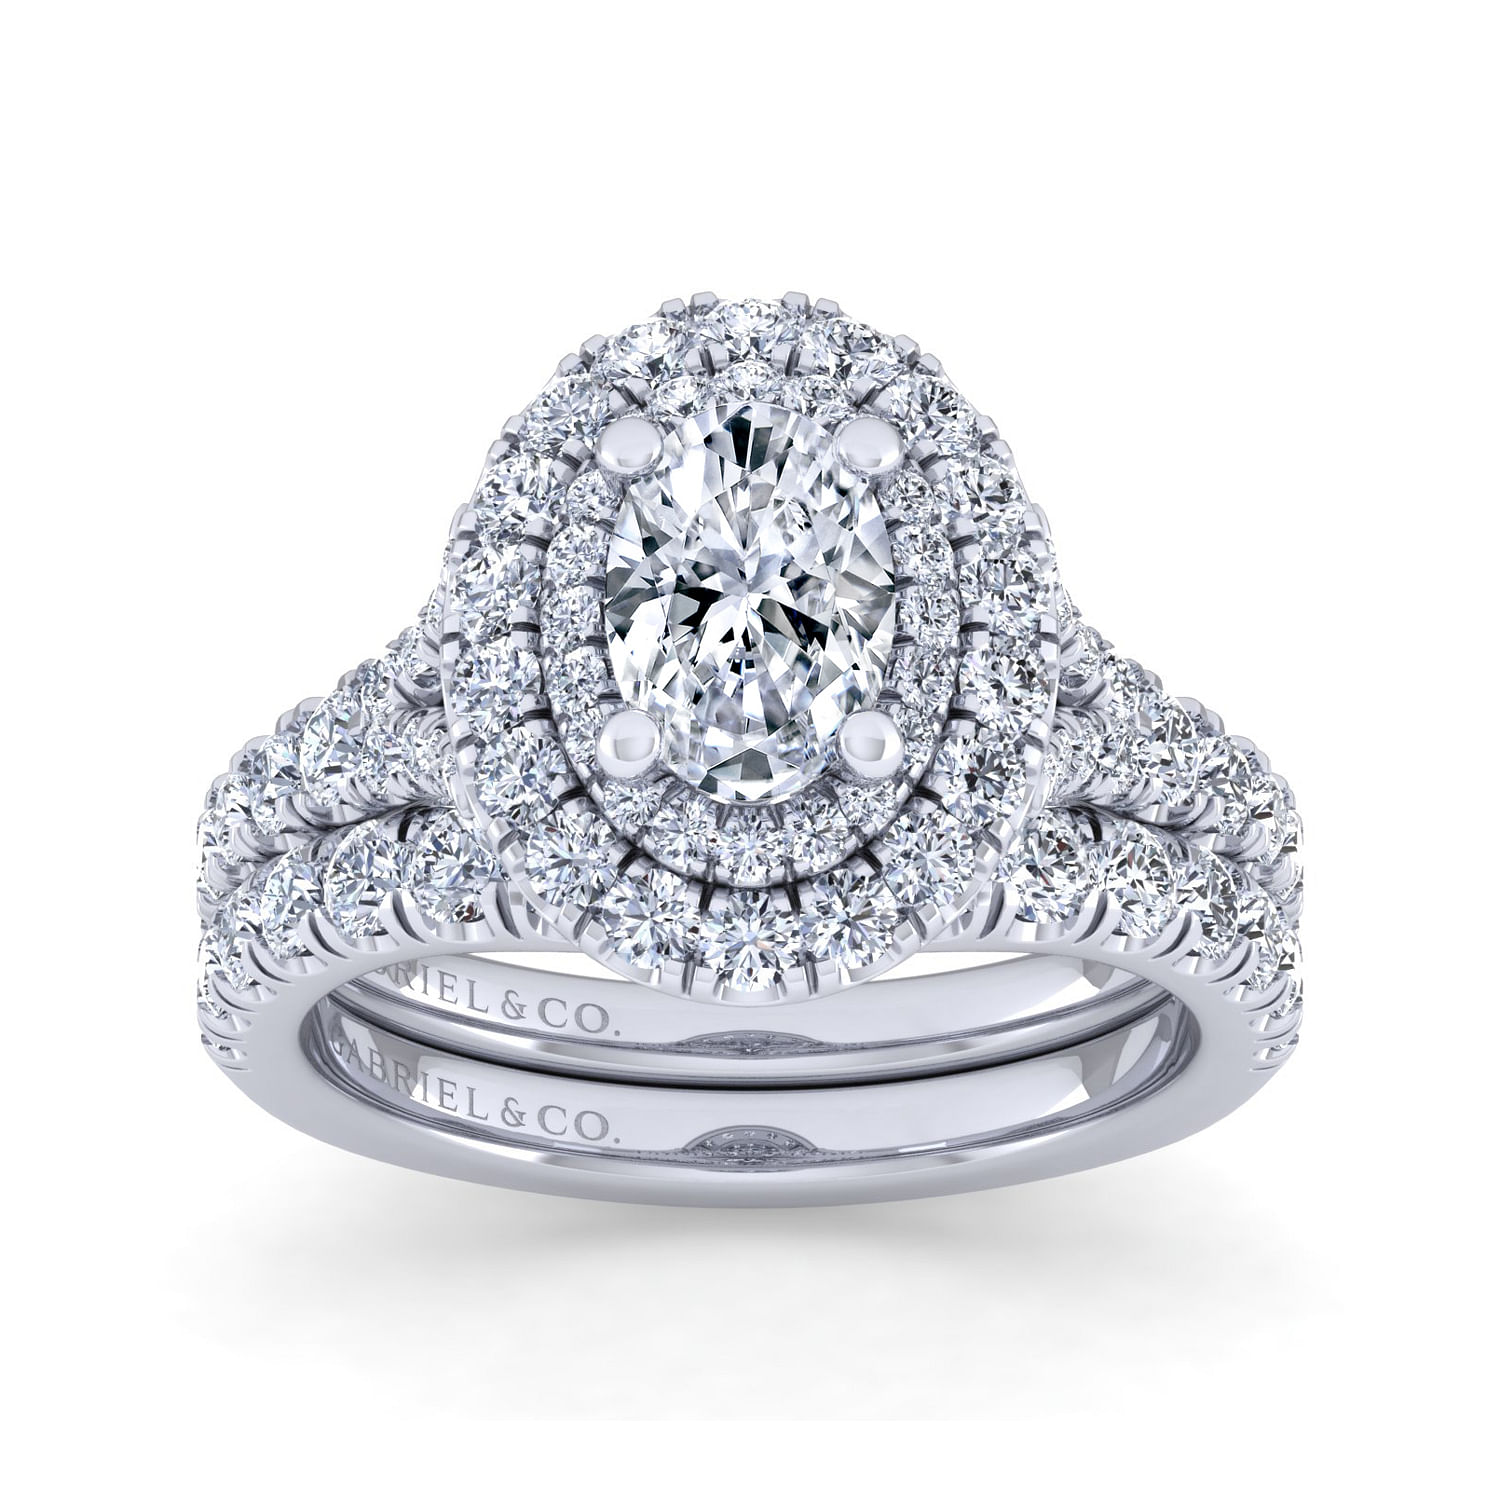 14K White Gold Oval Double Halo Diamond Engagement Ring